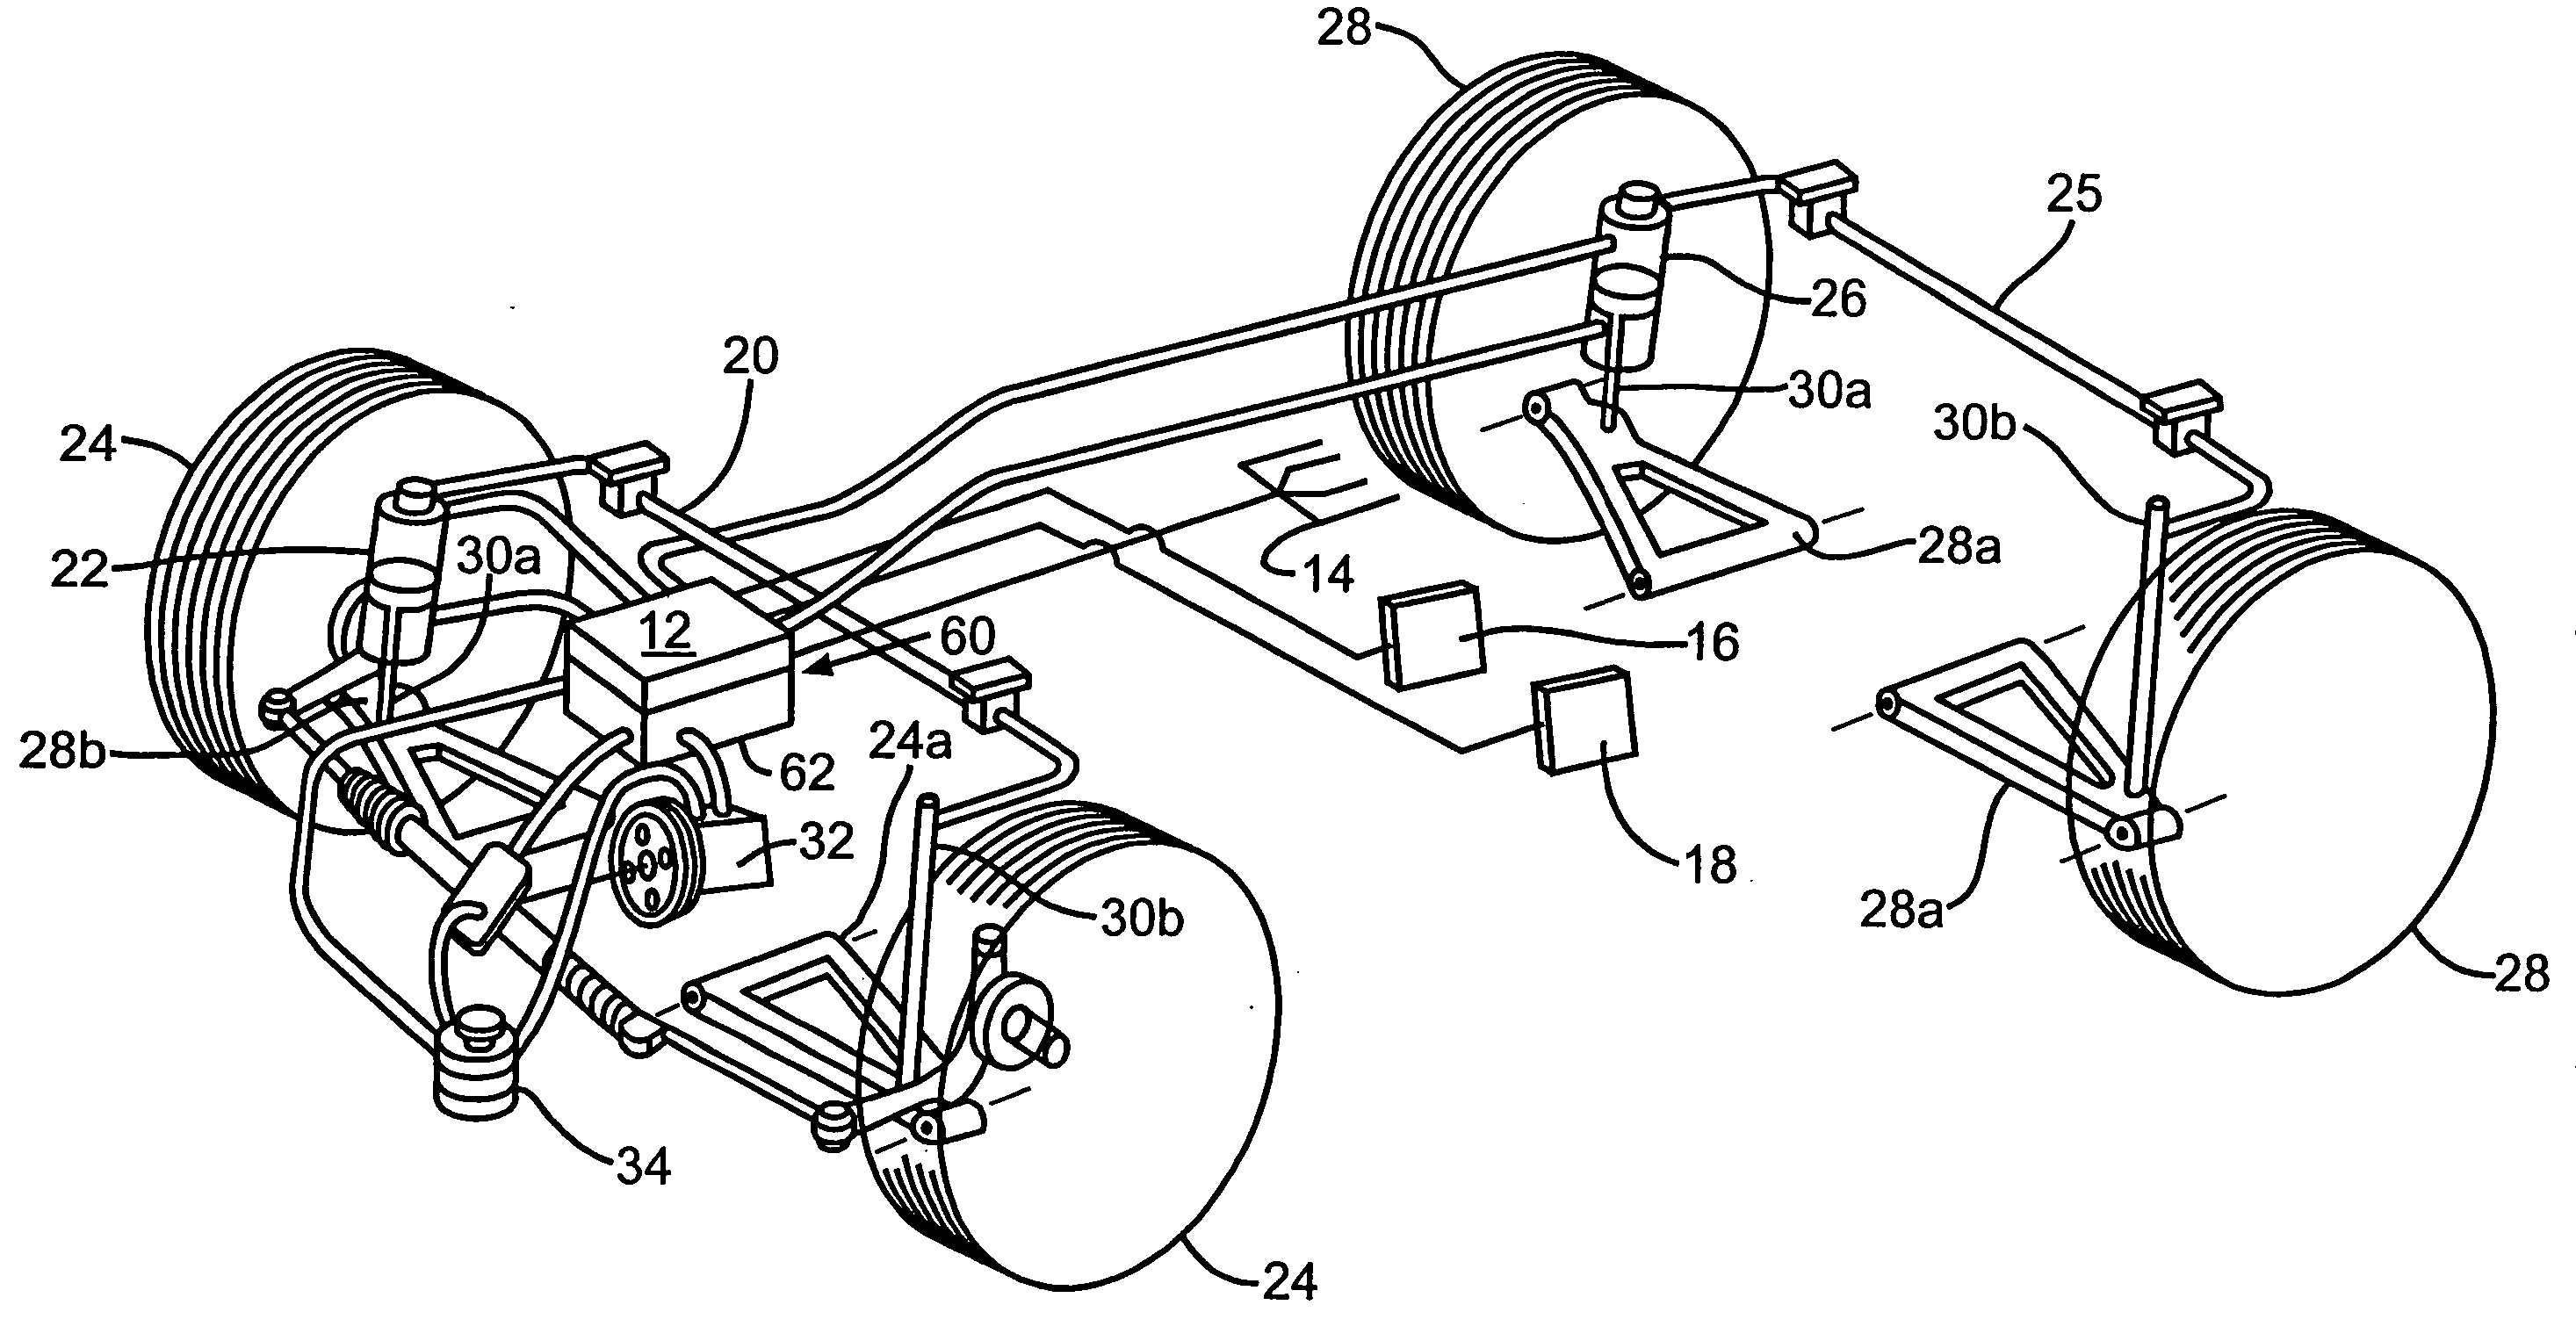 Integrated control unit for an active roll control system for a vehicle suspension system